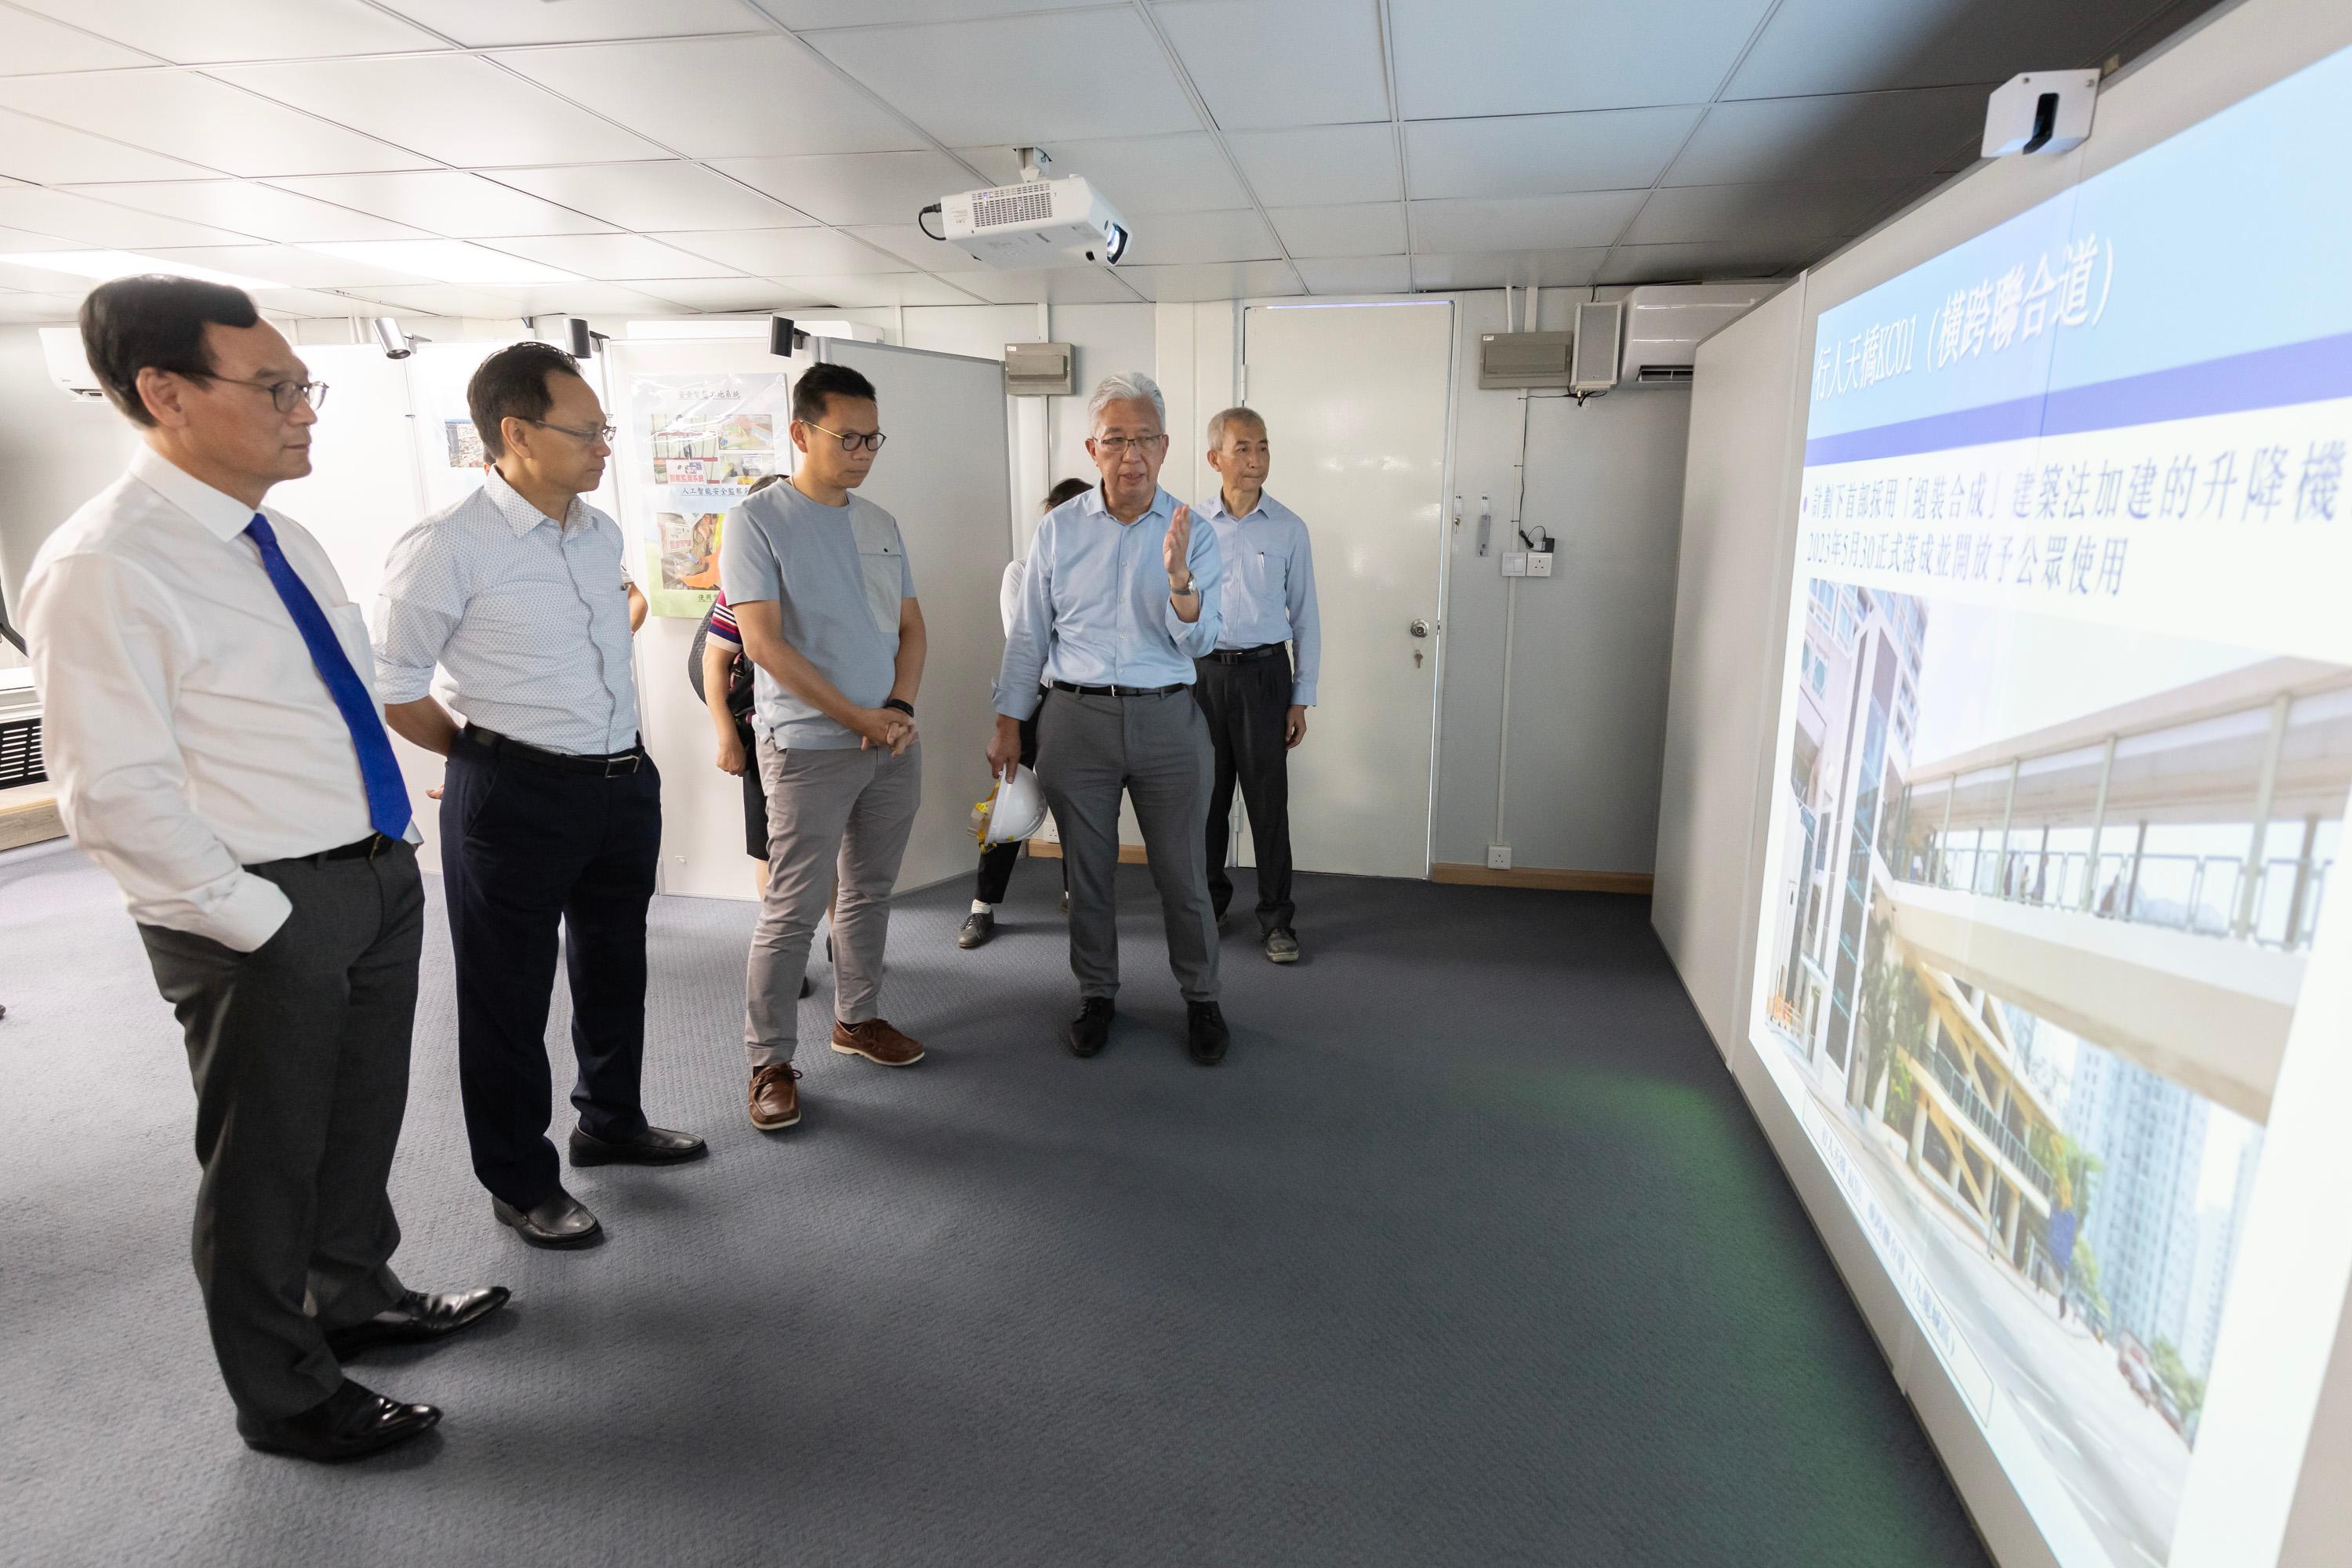 The Legislative Council Panel on Transport visited the Modular Integrated Construction lift assembly yard under the Universal Accessibility Programme (UA Programme) today (July 21) to learn about the Government's latest progress in building barrier-free facilities in public walkways. Photo shows Members receiving a briefing from representatives of the Highways Department on the UA Programme.
